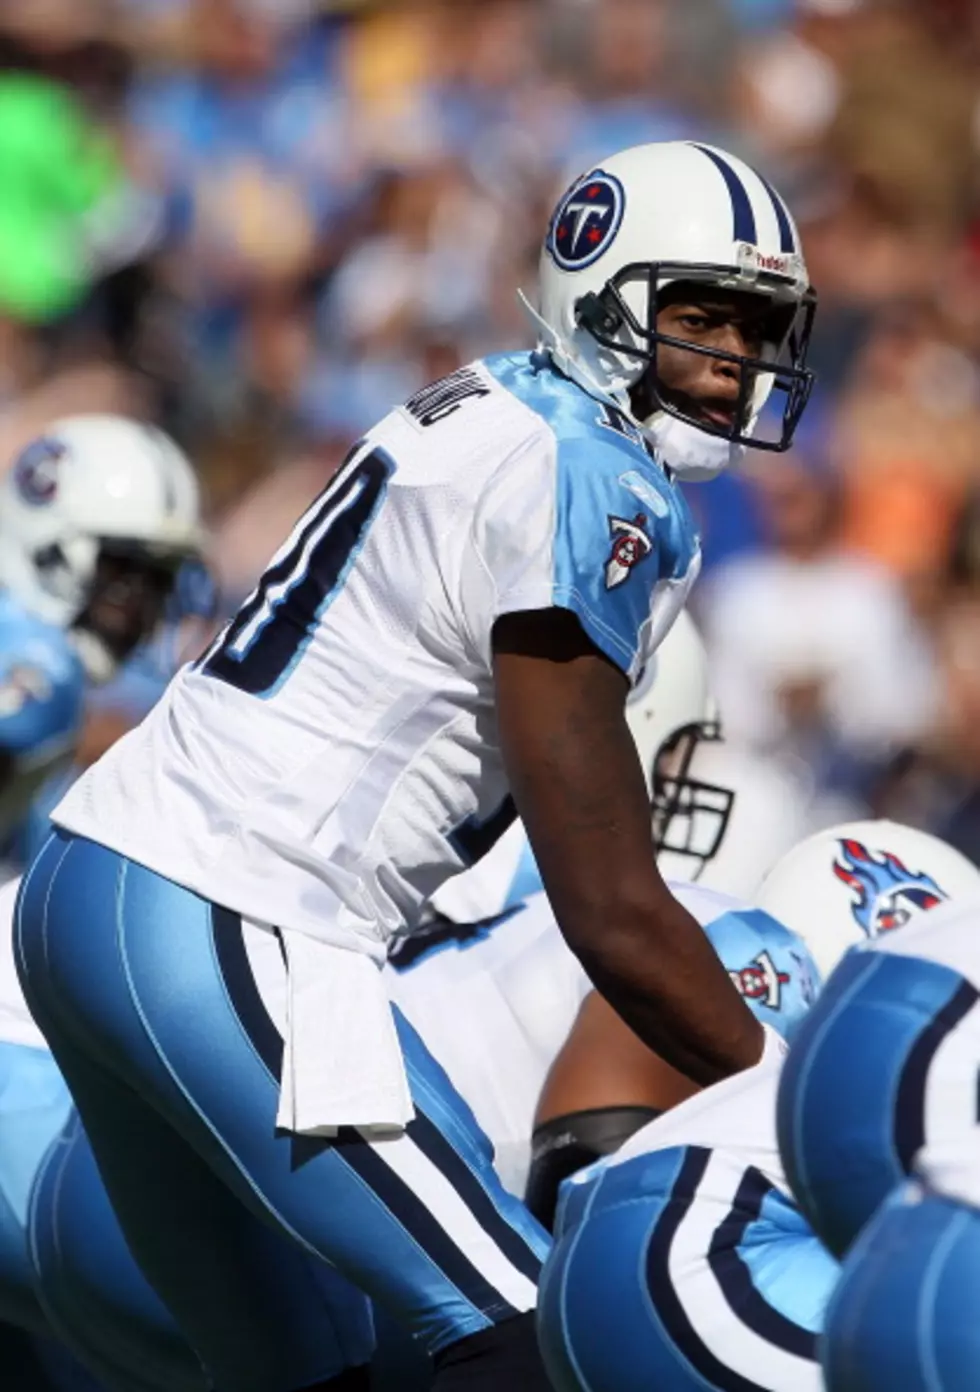 Would Vince Young Be Good For the Texans?